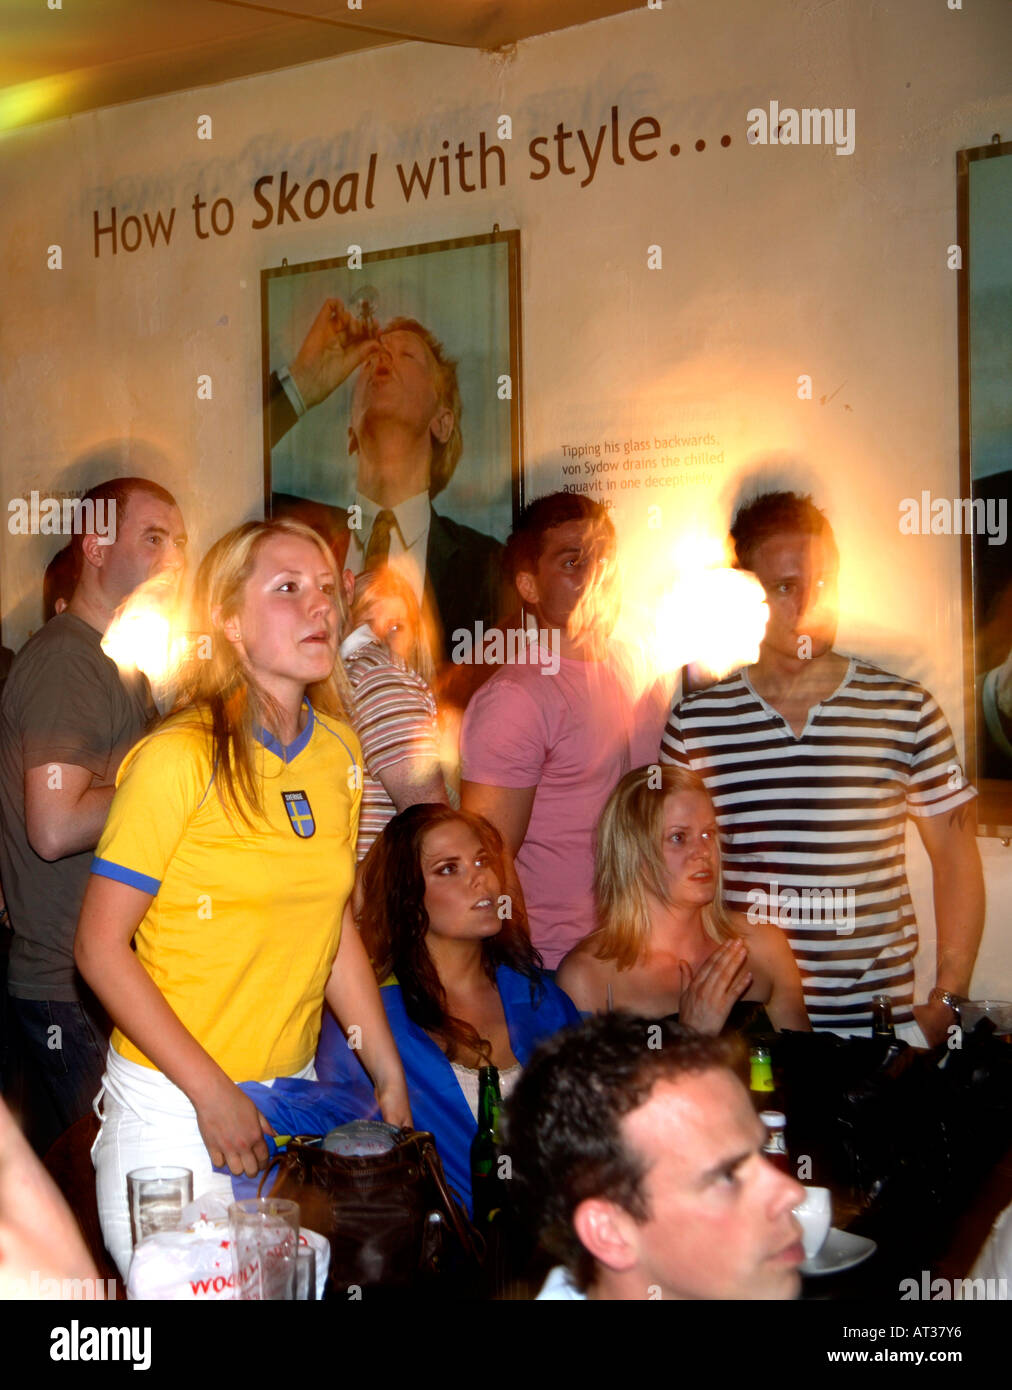 Swedish fans watching Sweden's opening game vs Trinidad & Tobago, World Cup 2006, Nordic Bar, London Stock Photo